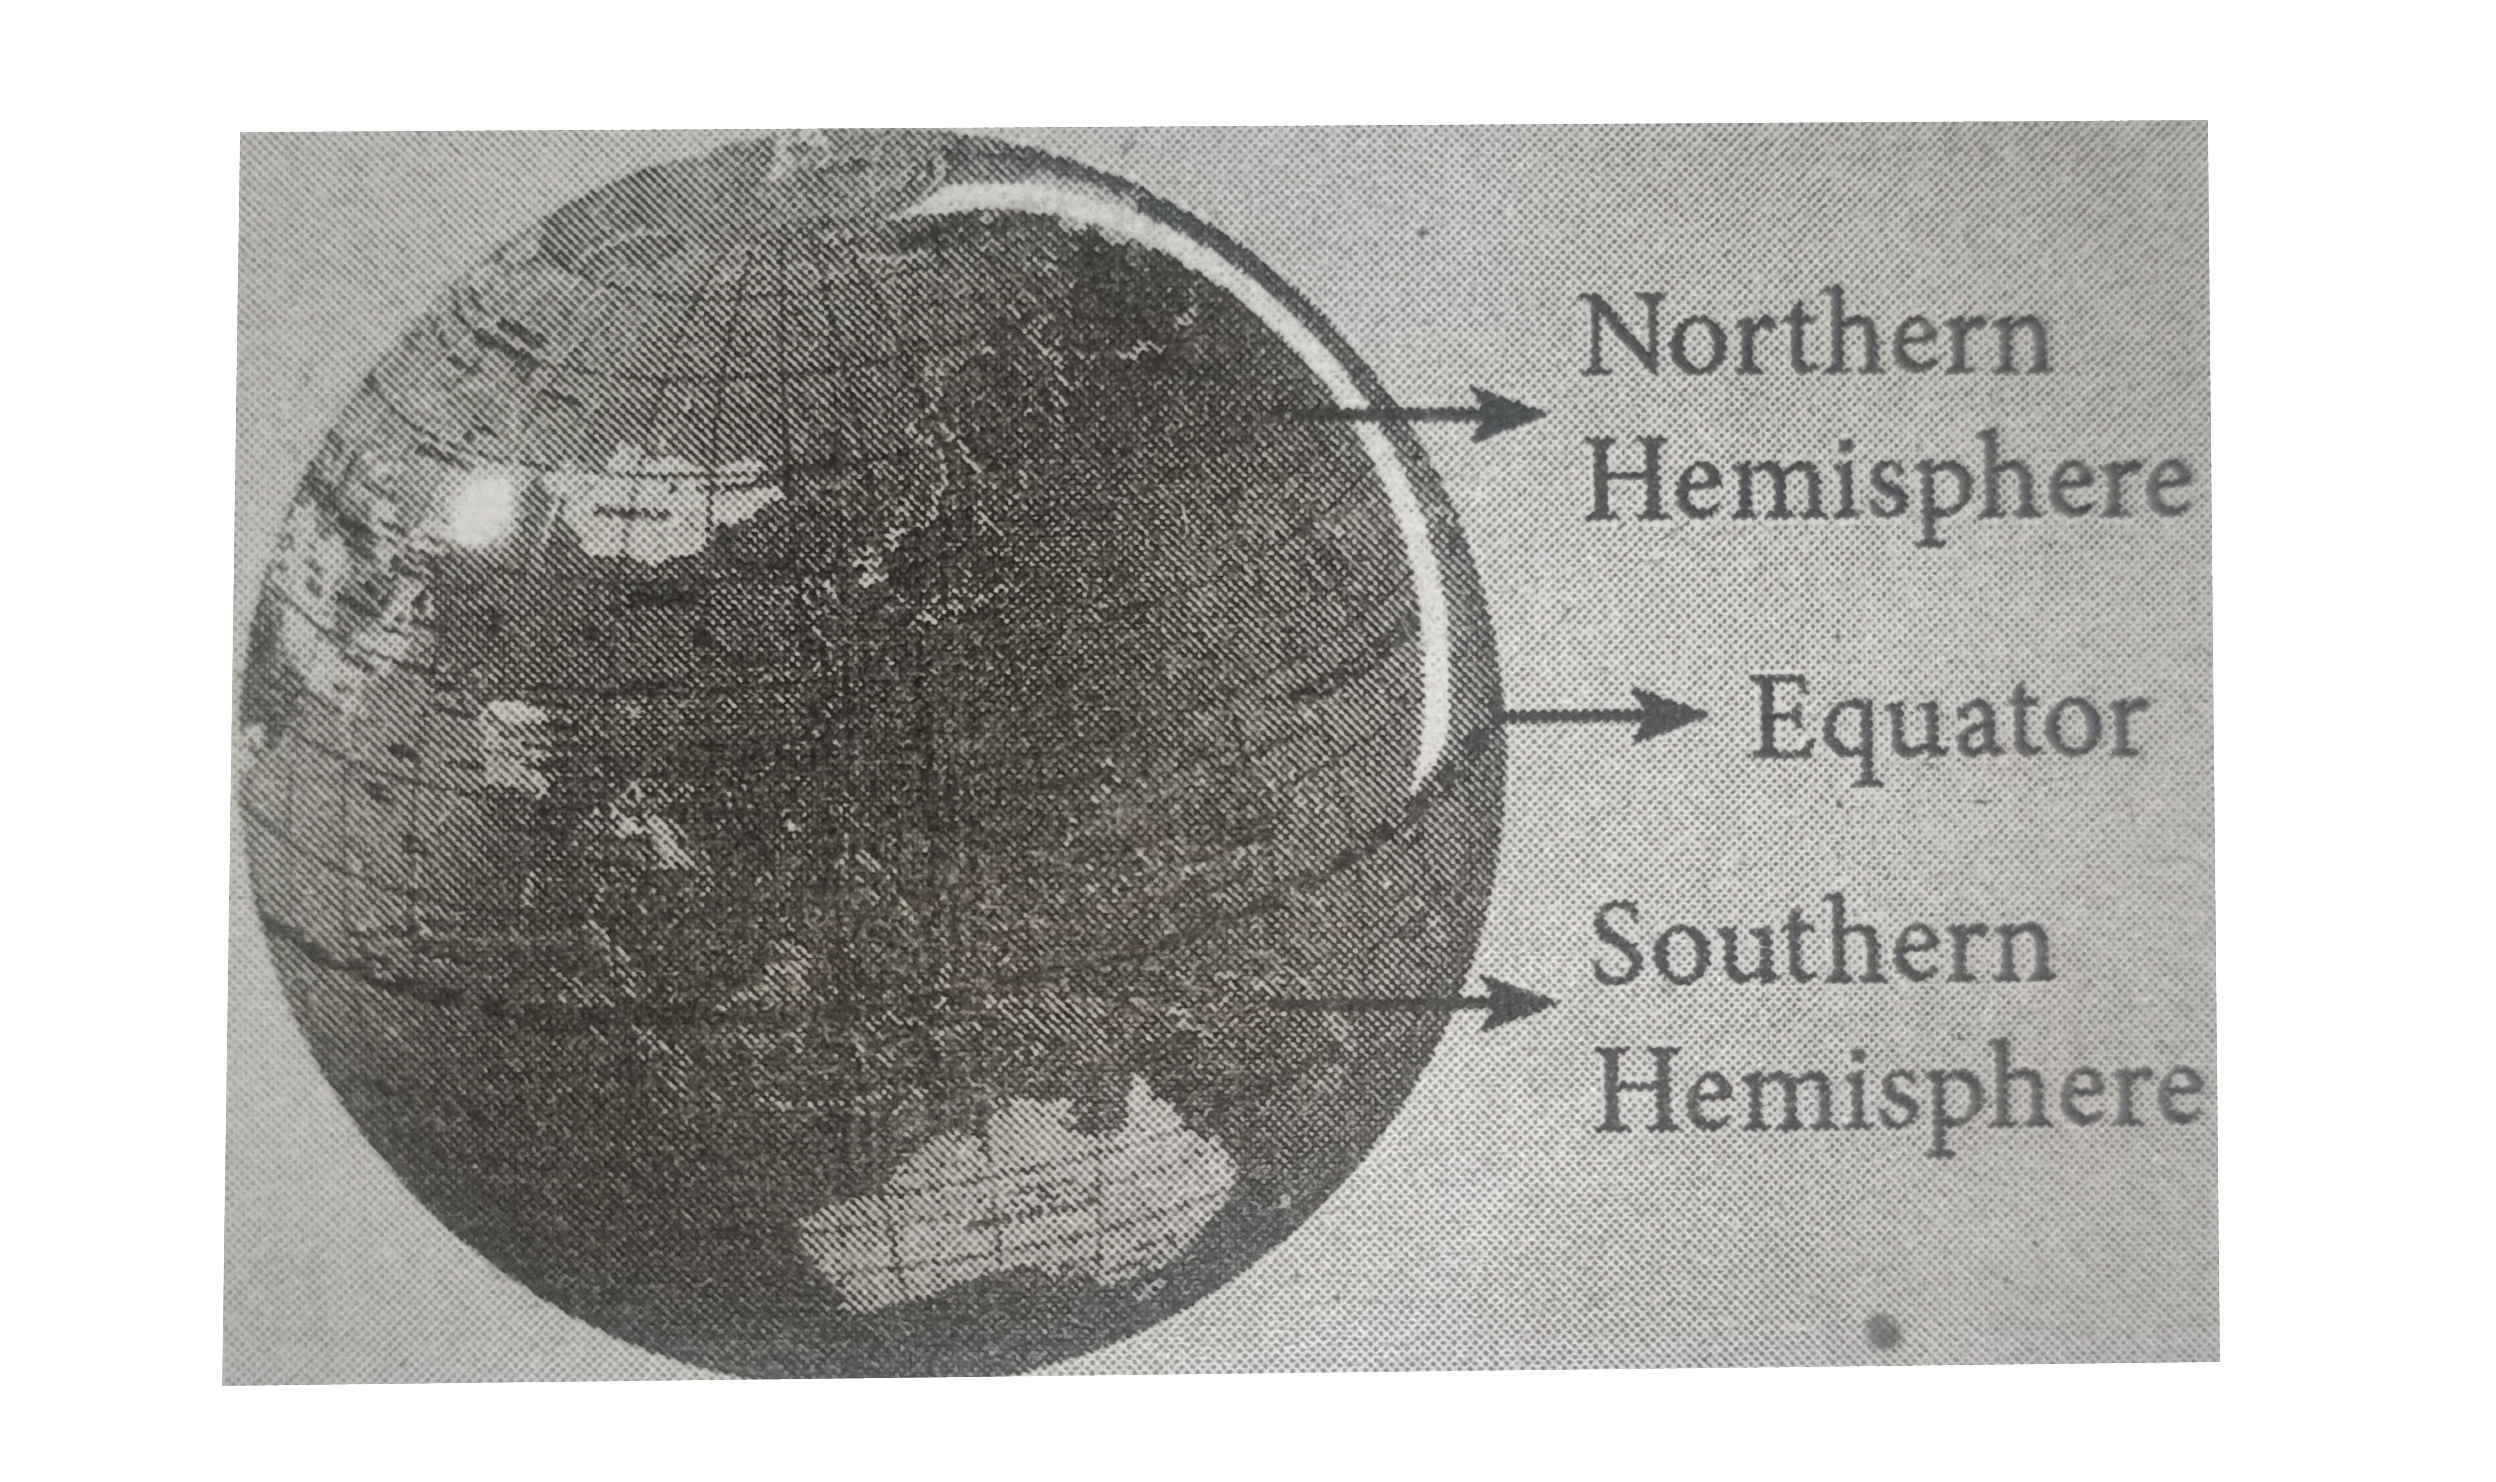 Using a globe list any two countries in the northern and southern hemispheres.